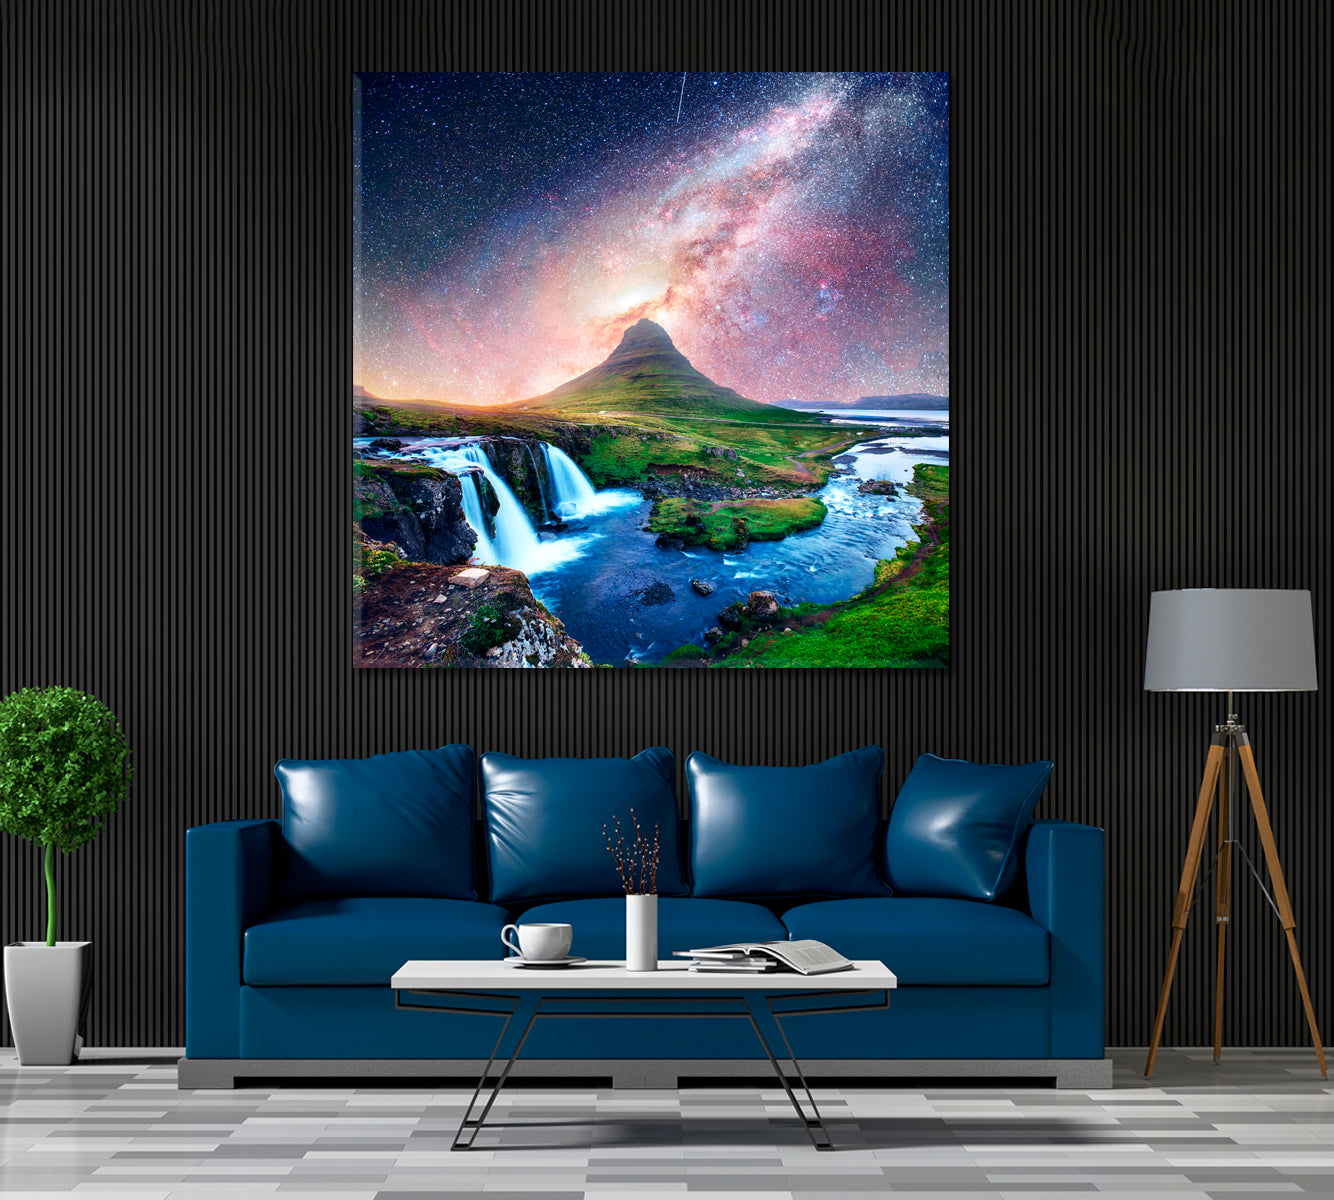 Starry Sky over Kirkjufell Mountain Iceland Canvas Print ArtLexy 1 Panel 12"x12" inches 